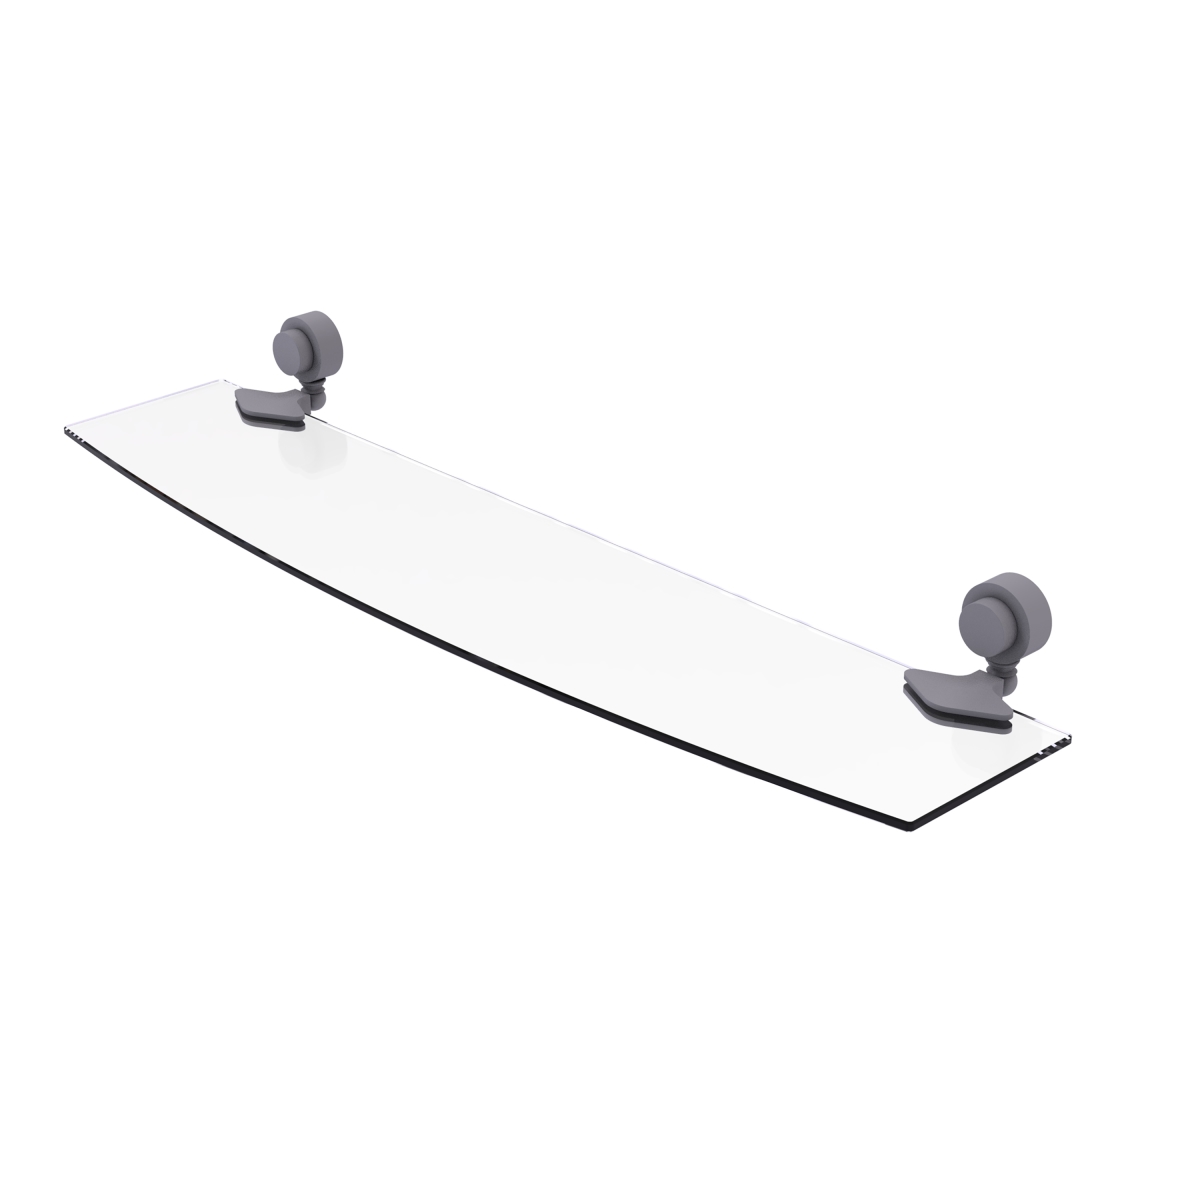 Picture of Allied Brass 433-24-GYM 24 in. Venus Collection Glass Shelf, Matte Gray